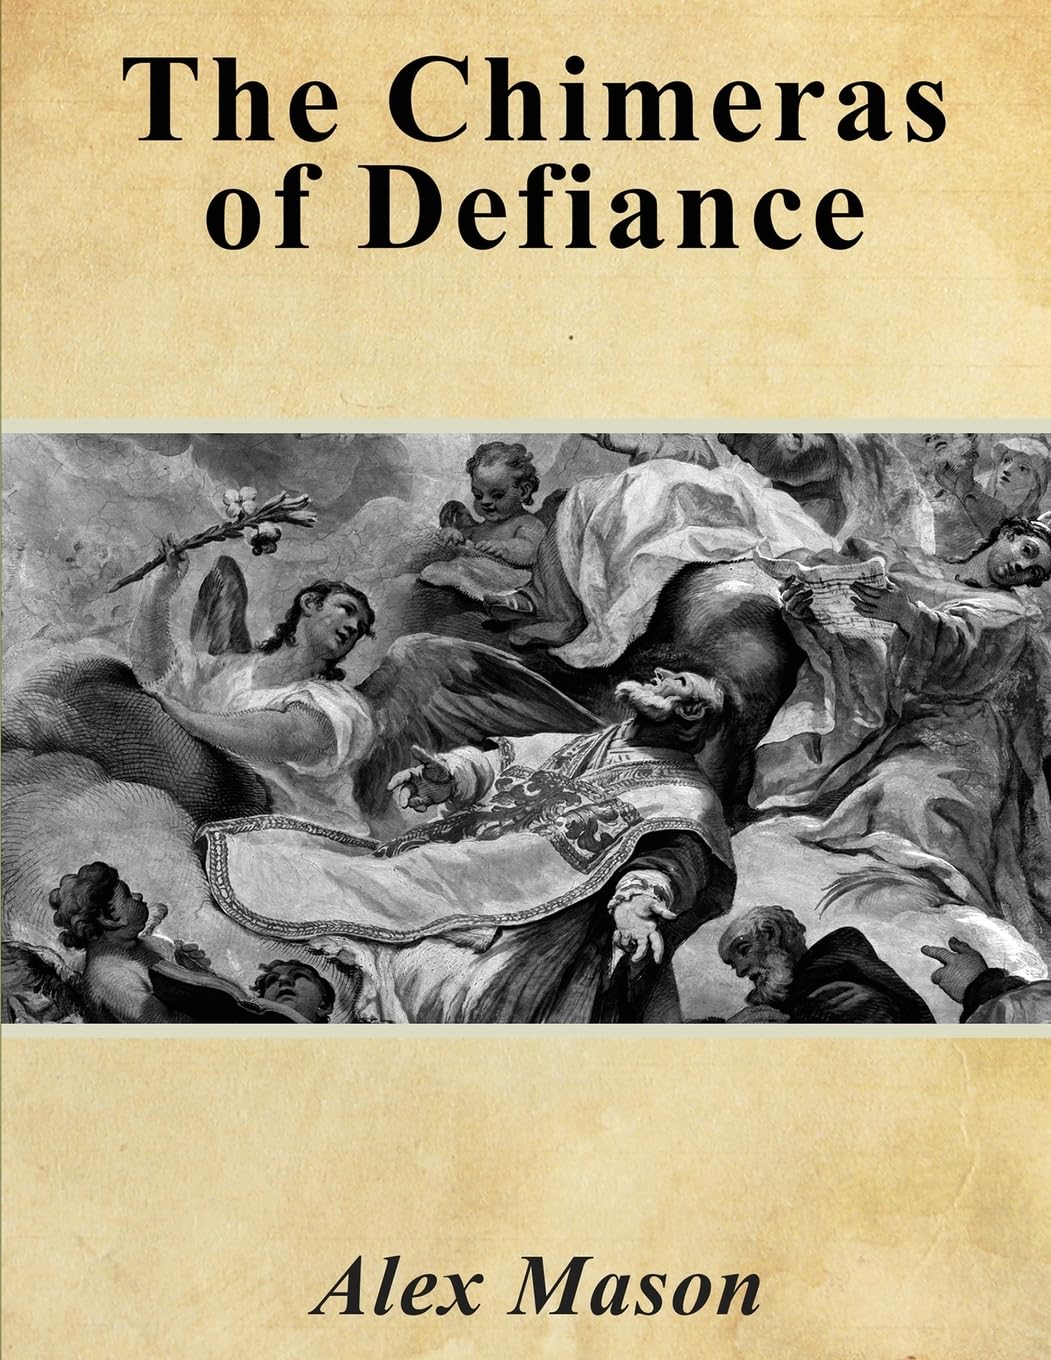 "The Chimeras of Defiance" by Alex Mason: A Gripping Tale of Human Nature and the Ultimate Test of Morality